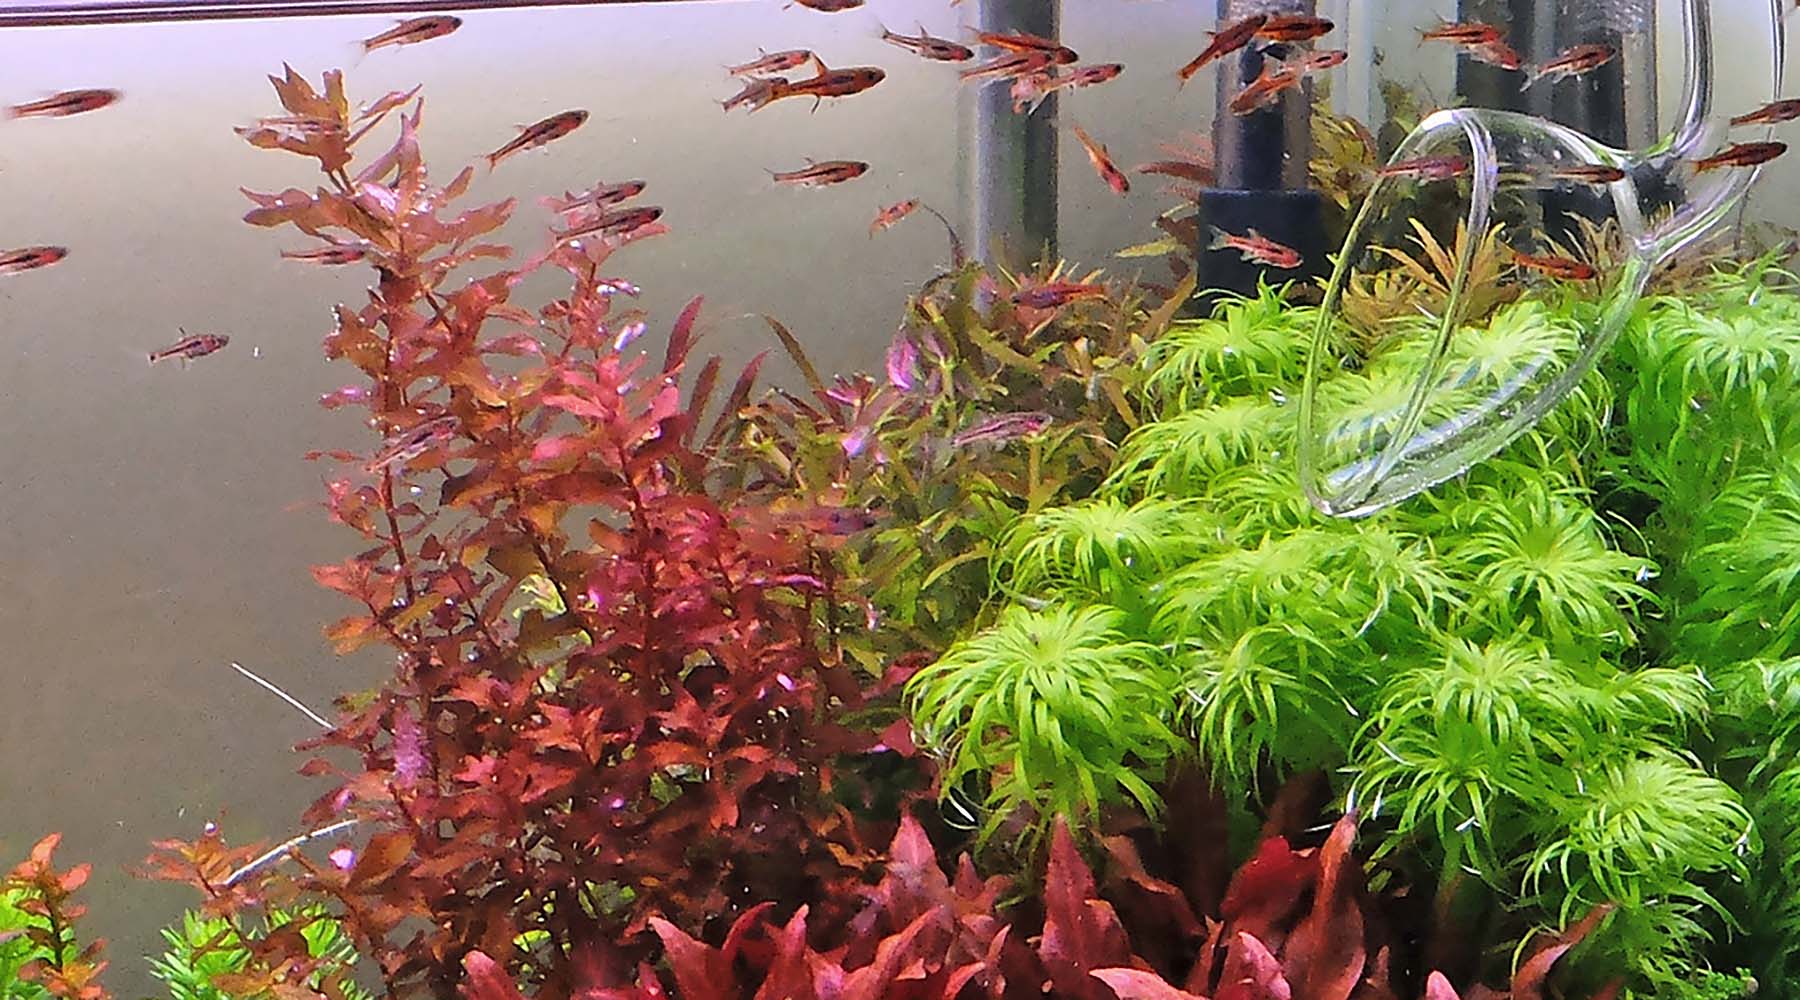 Best schooling fishes for planted tanks